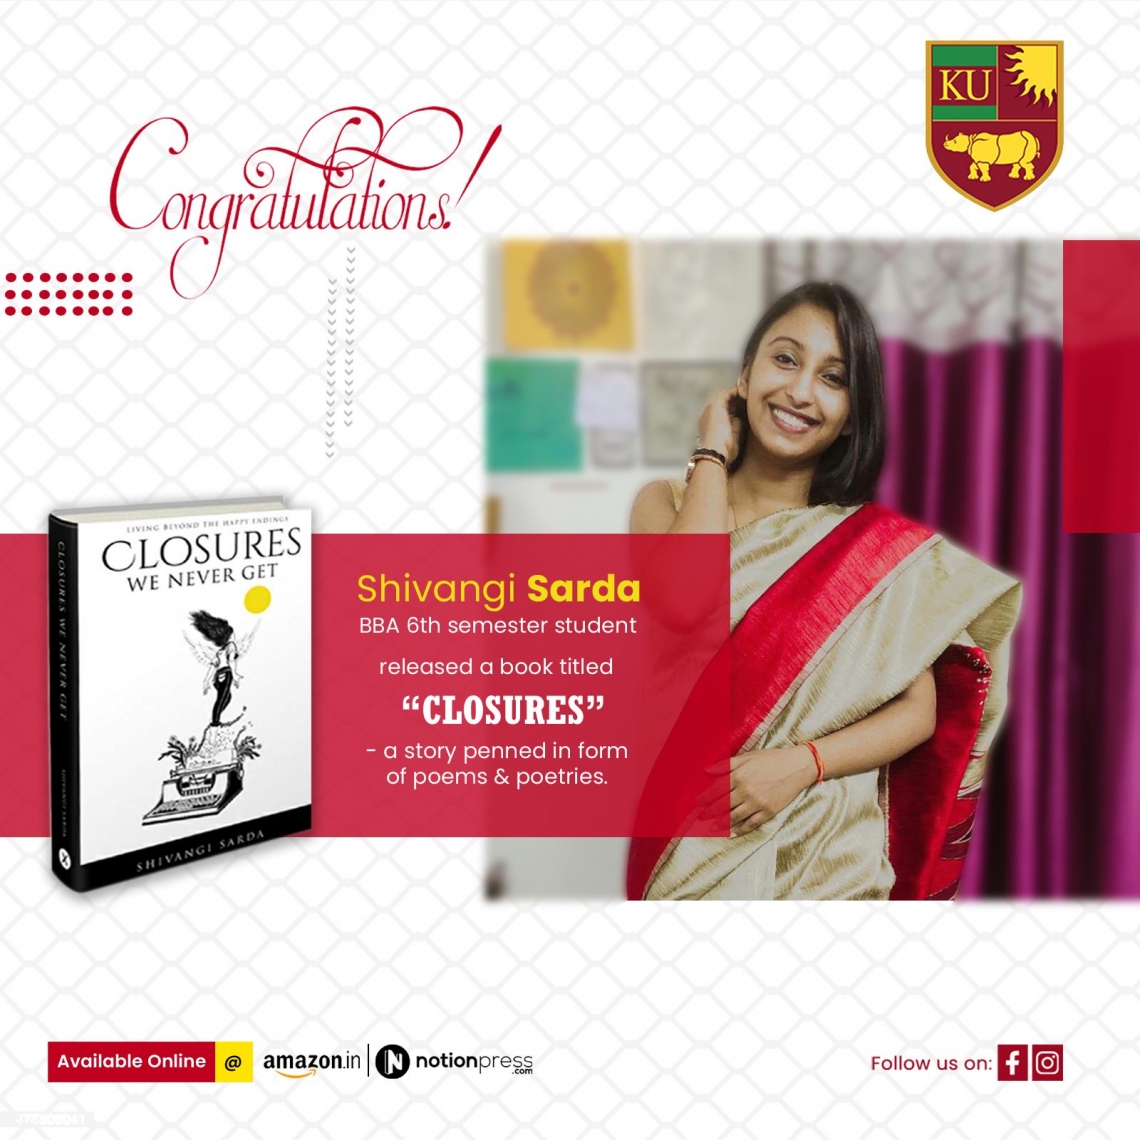 BBA 6th Semester student, Shivangi Maheswari on the release of her book titled, "CLOSURES".